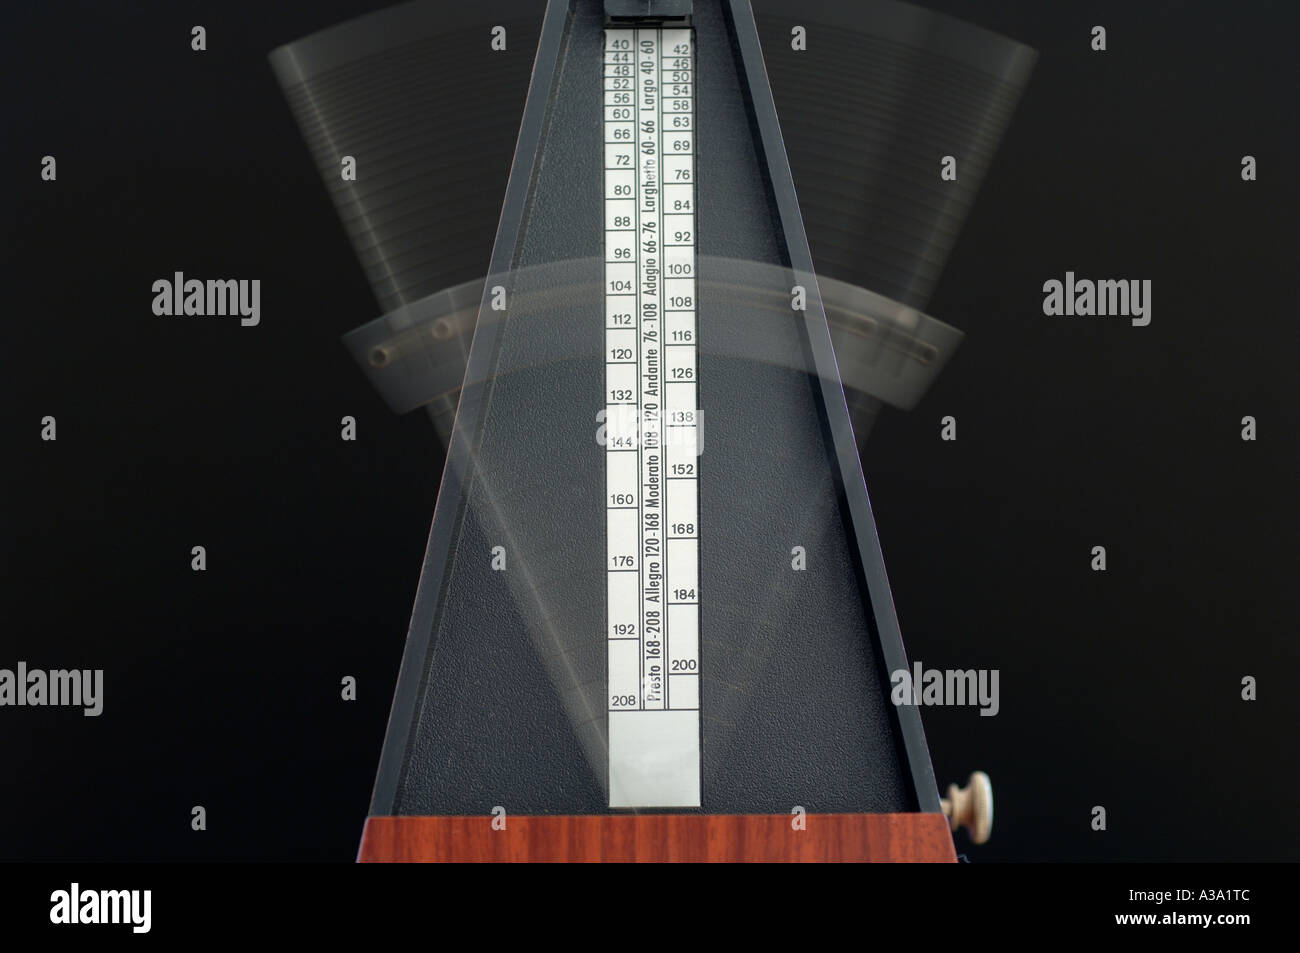 Blurred moving arm on a musicians mechanical metronome. Credit: Malcolm Park/Alamy. Stock Photo